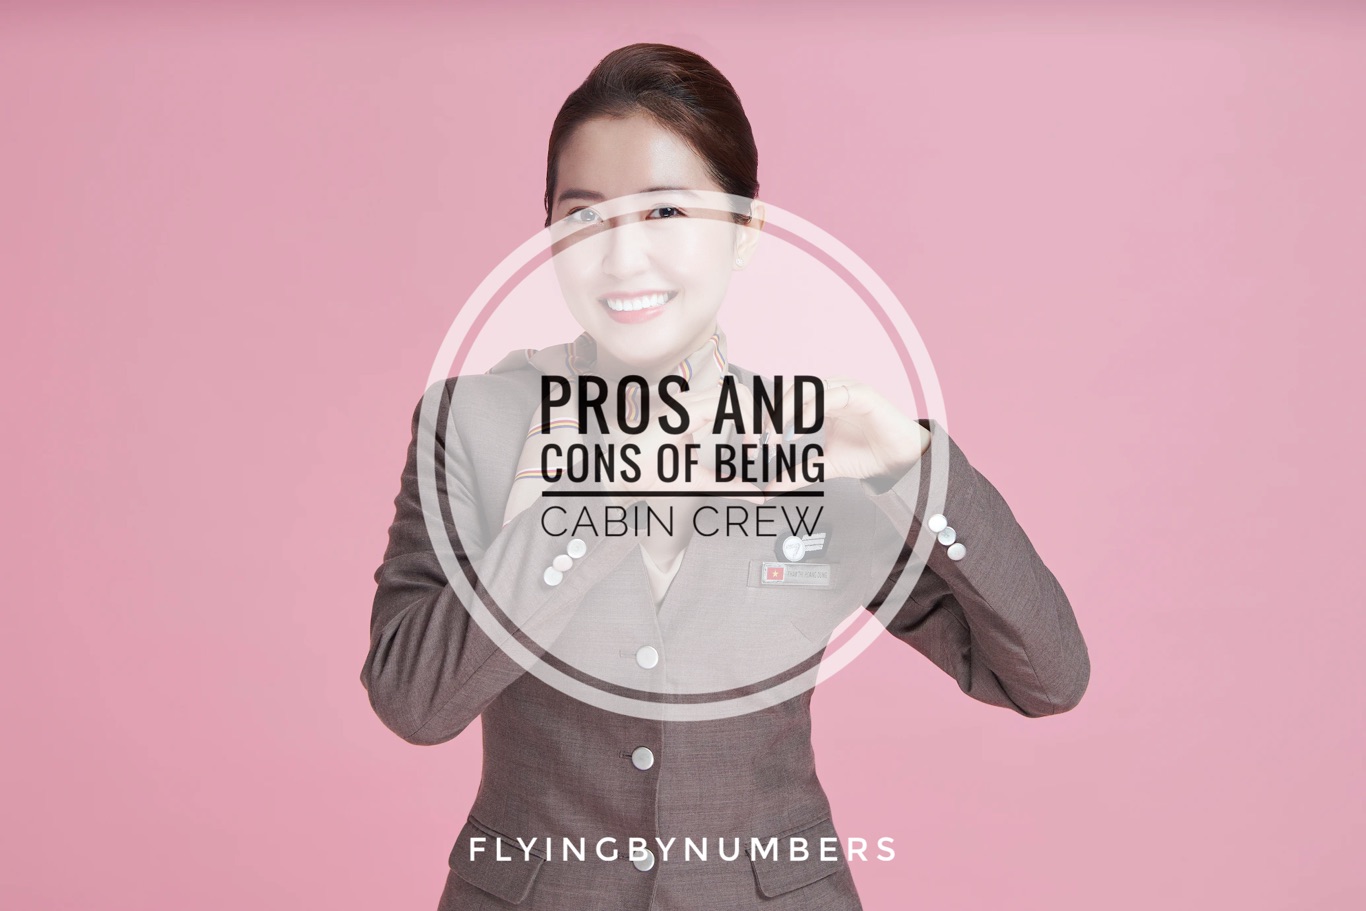 A look at the pros and cons of being a flight attendant